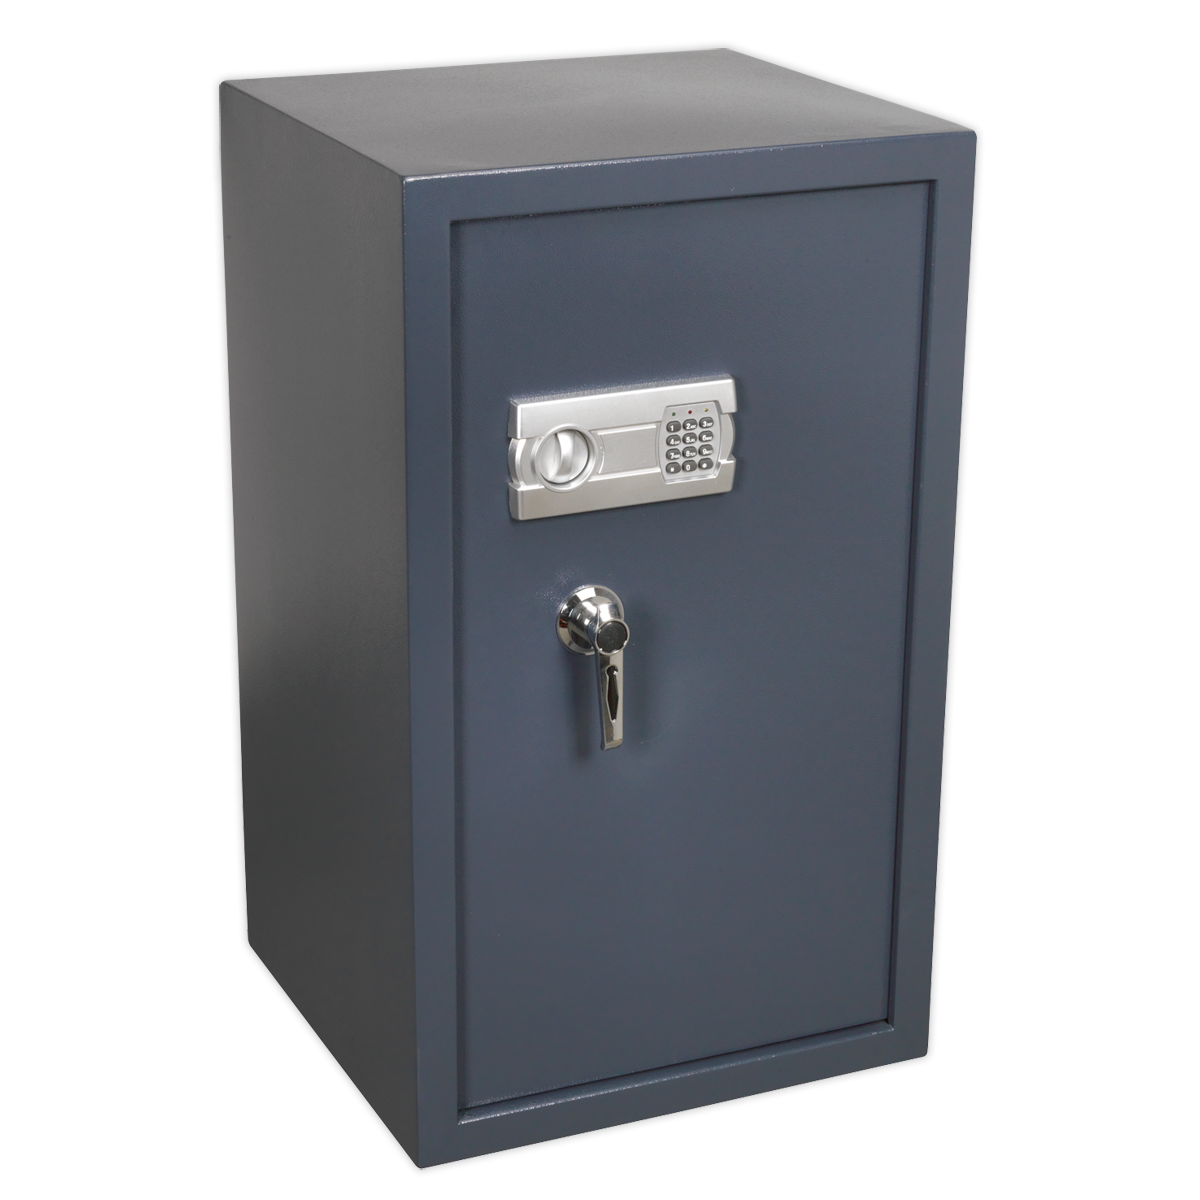 Sealey Electronic Combination Security Safe 515 x 480 x 890mm